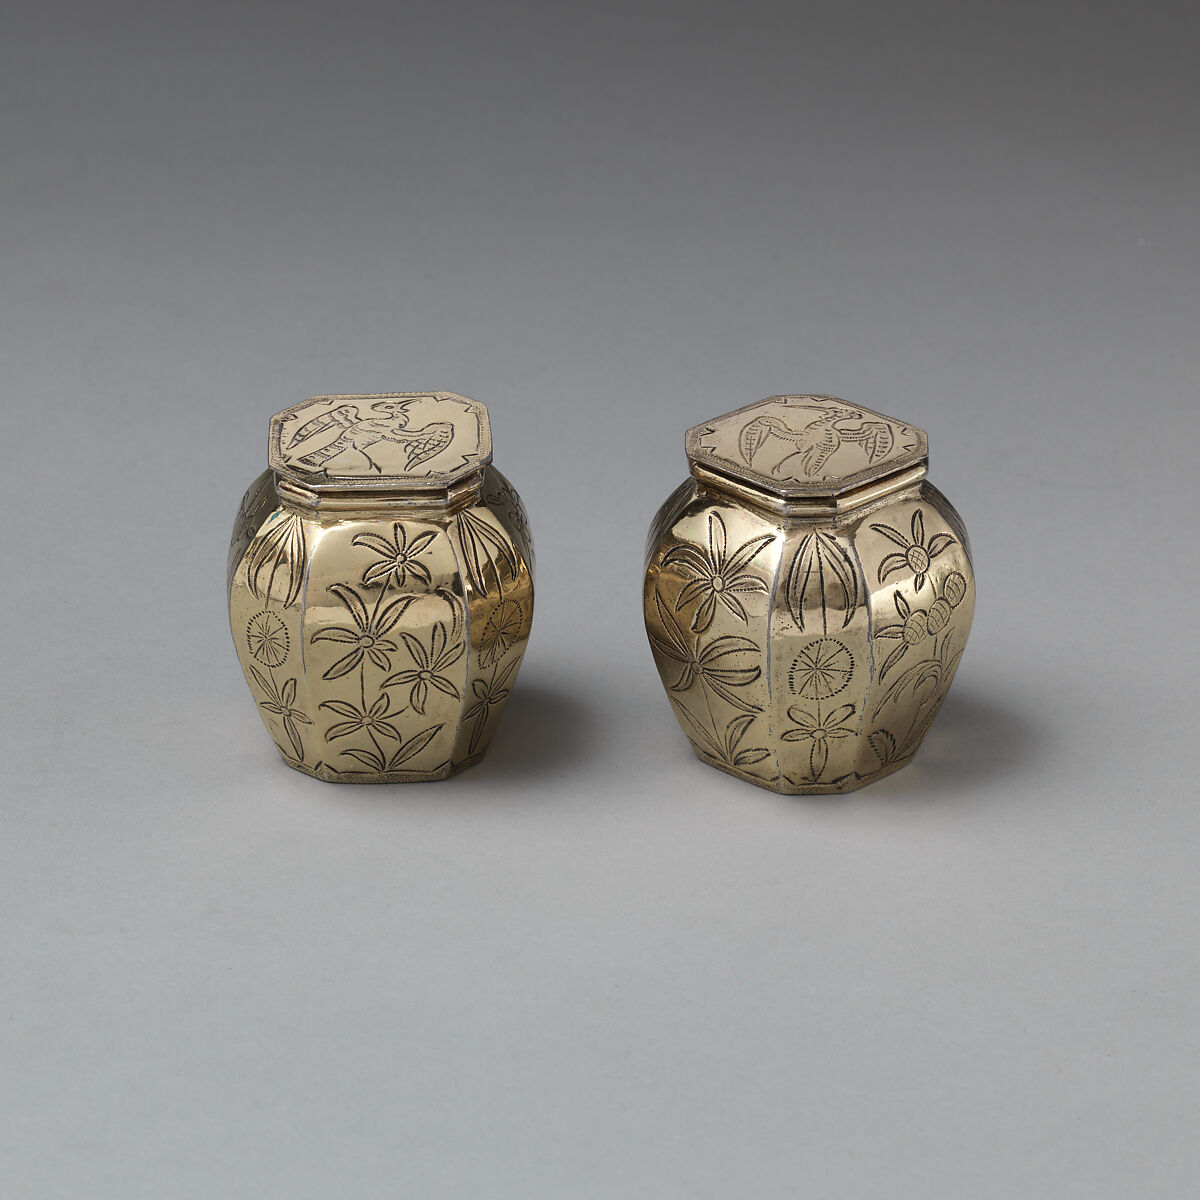 Pair of pomade pots (part of a toilet service), Probably by Thomas Jenkins (active 1668–1708), Silver gilt, British, London 